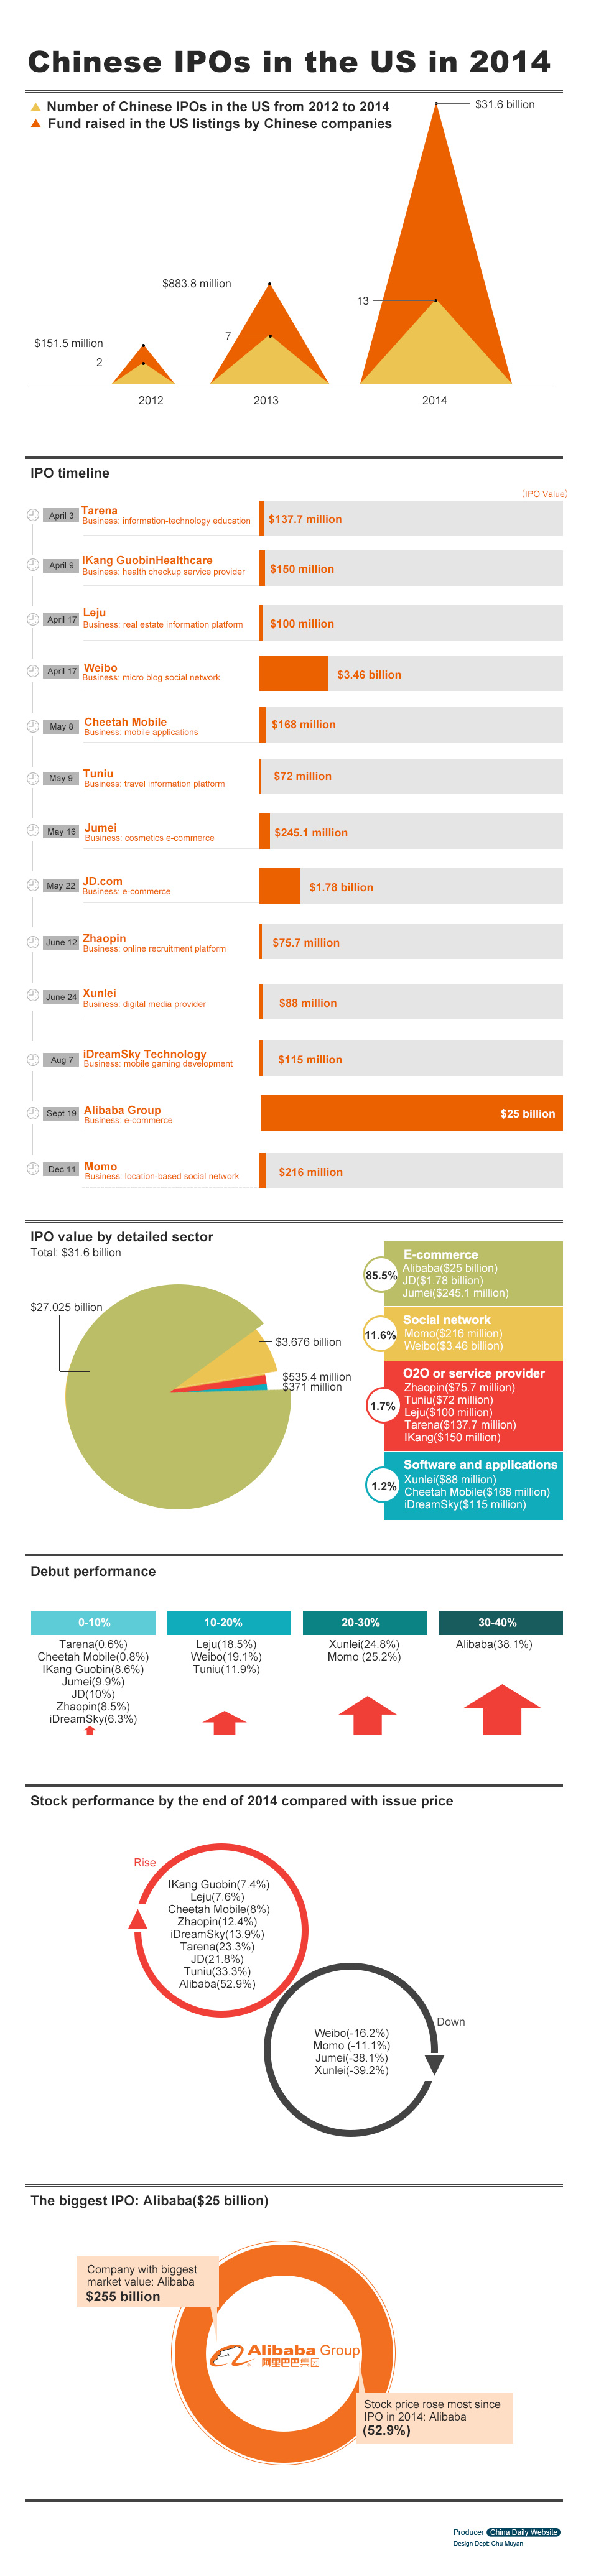 Infographic:Chinese IPOs in the US in 2014